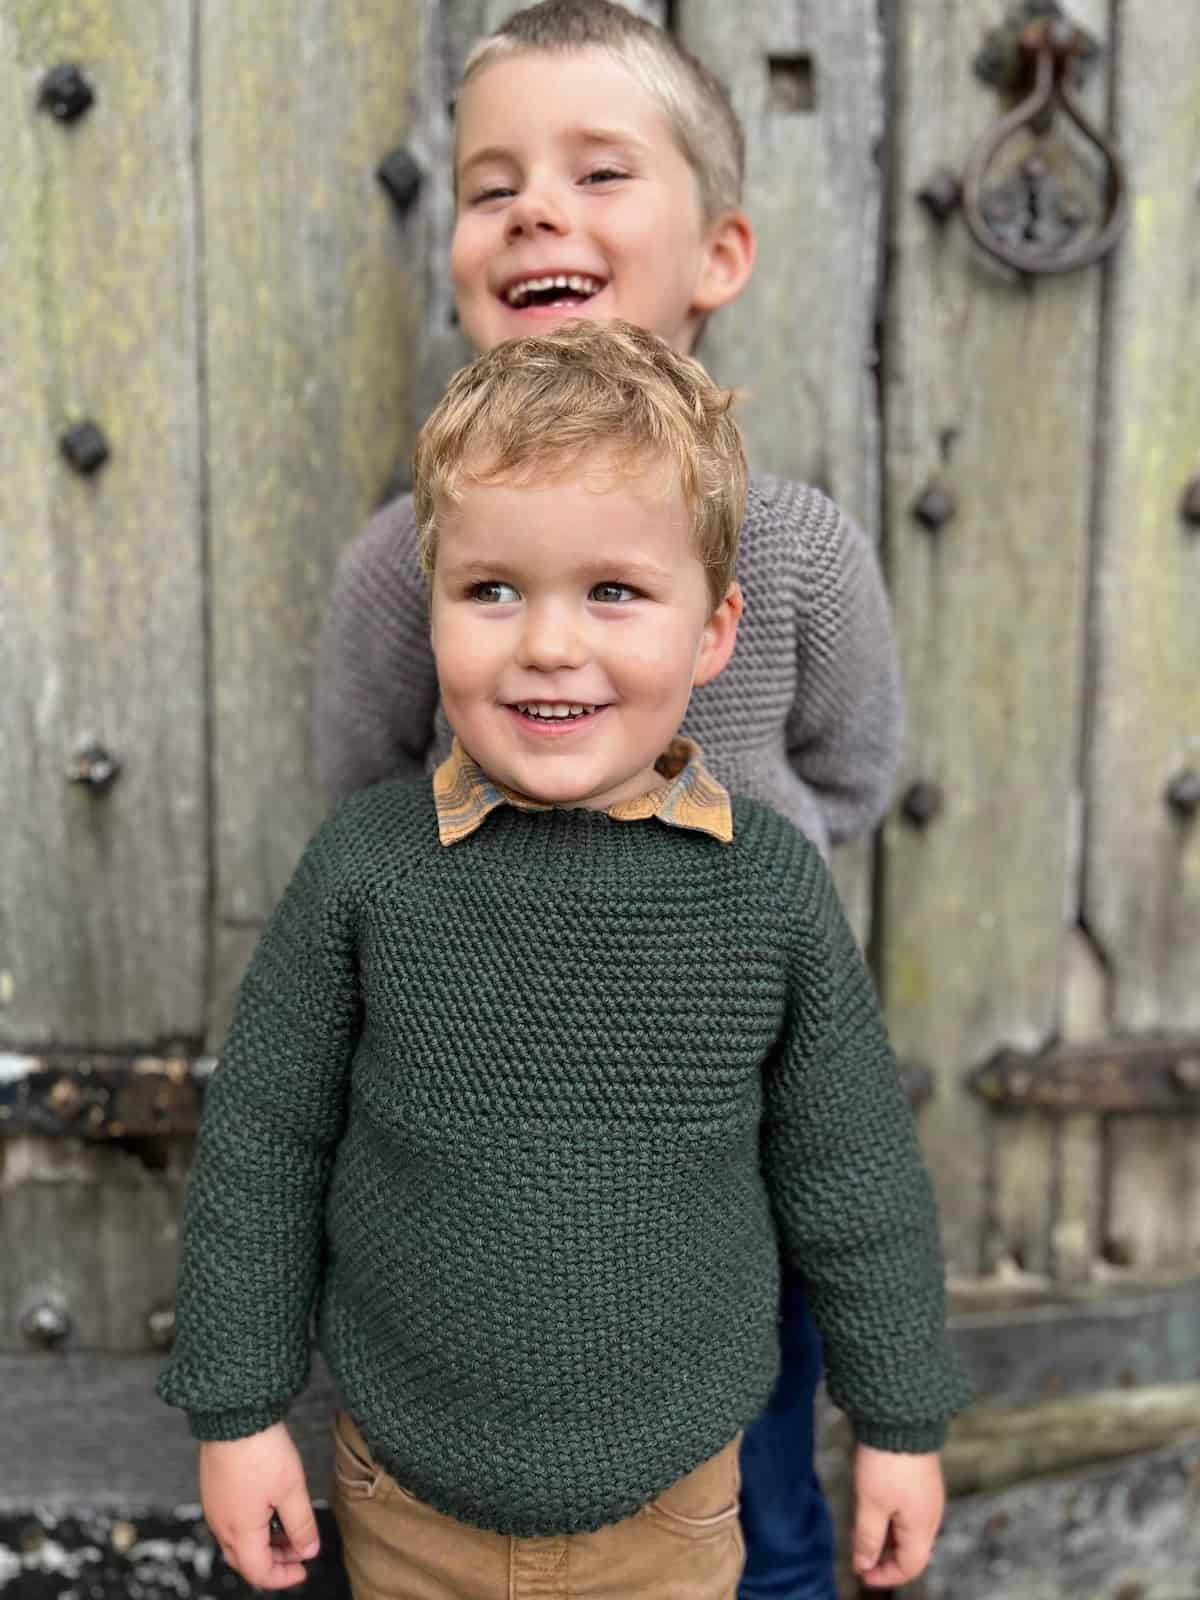 Boys in crochet sweaters standing behind each other smiling.